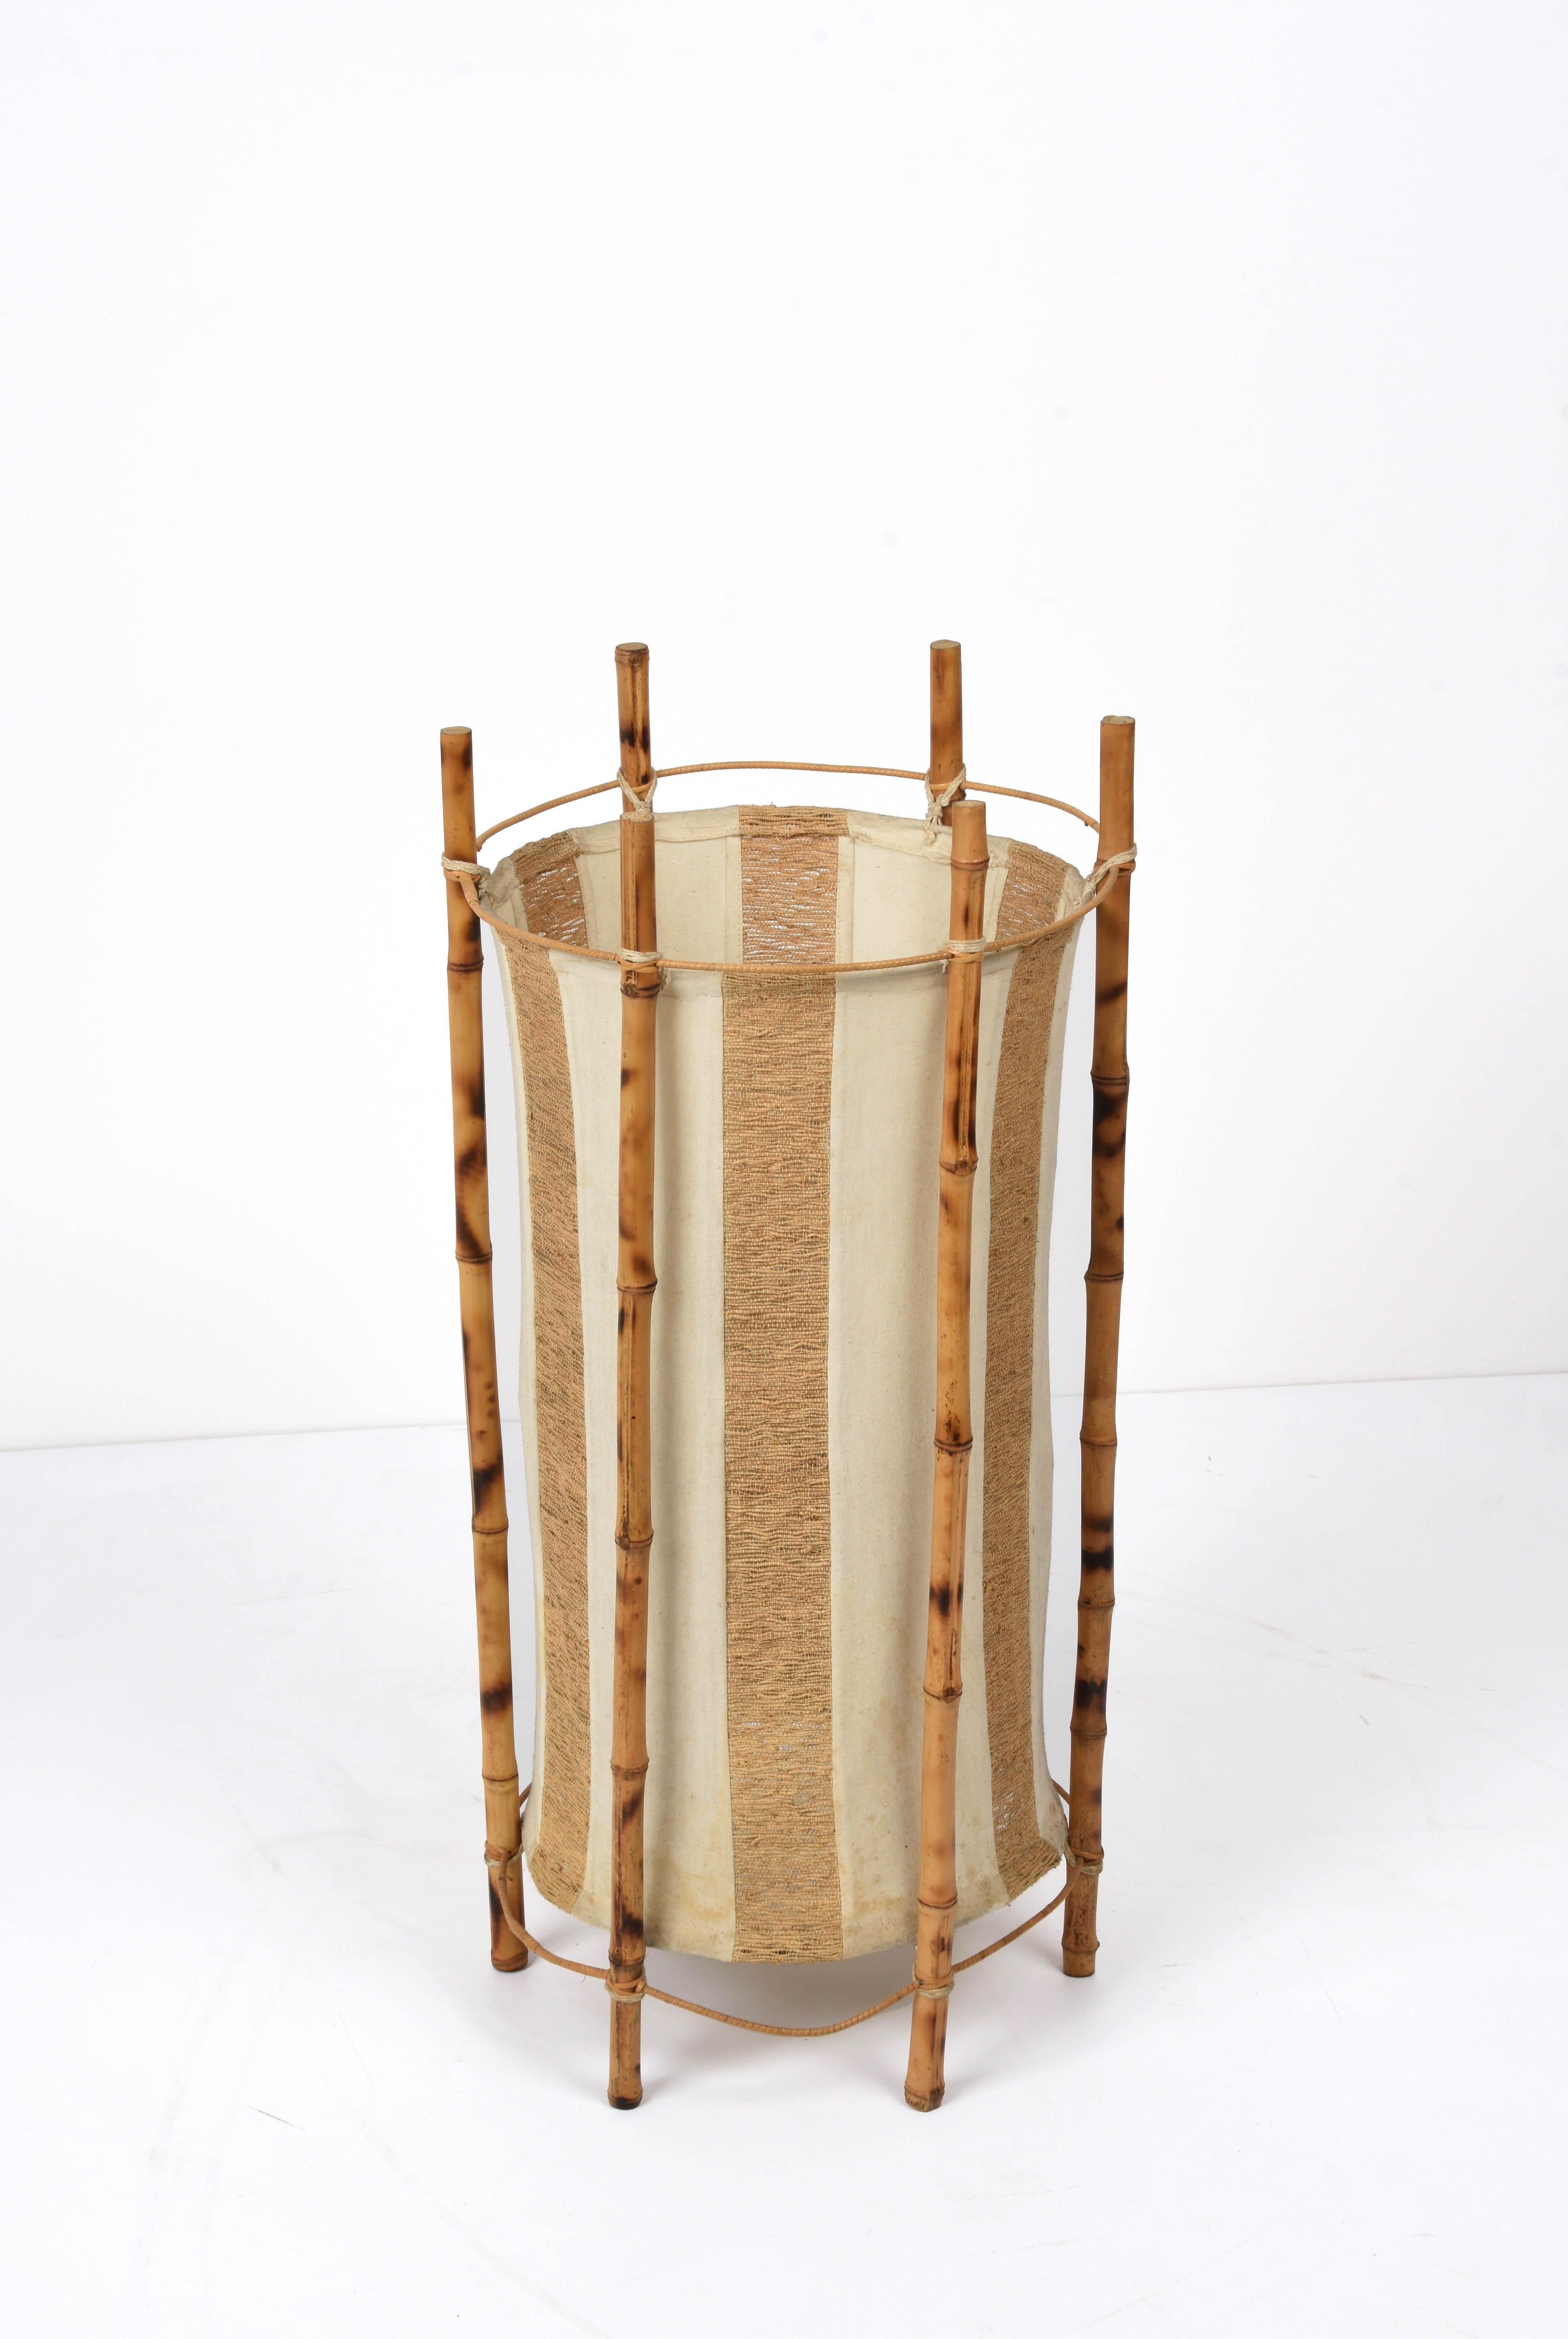 Louis Sognot Midcentury Cotton, Bamboo and Rattan Italian Floor Lamp, 1950s For Sale 3